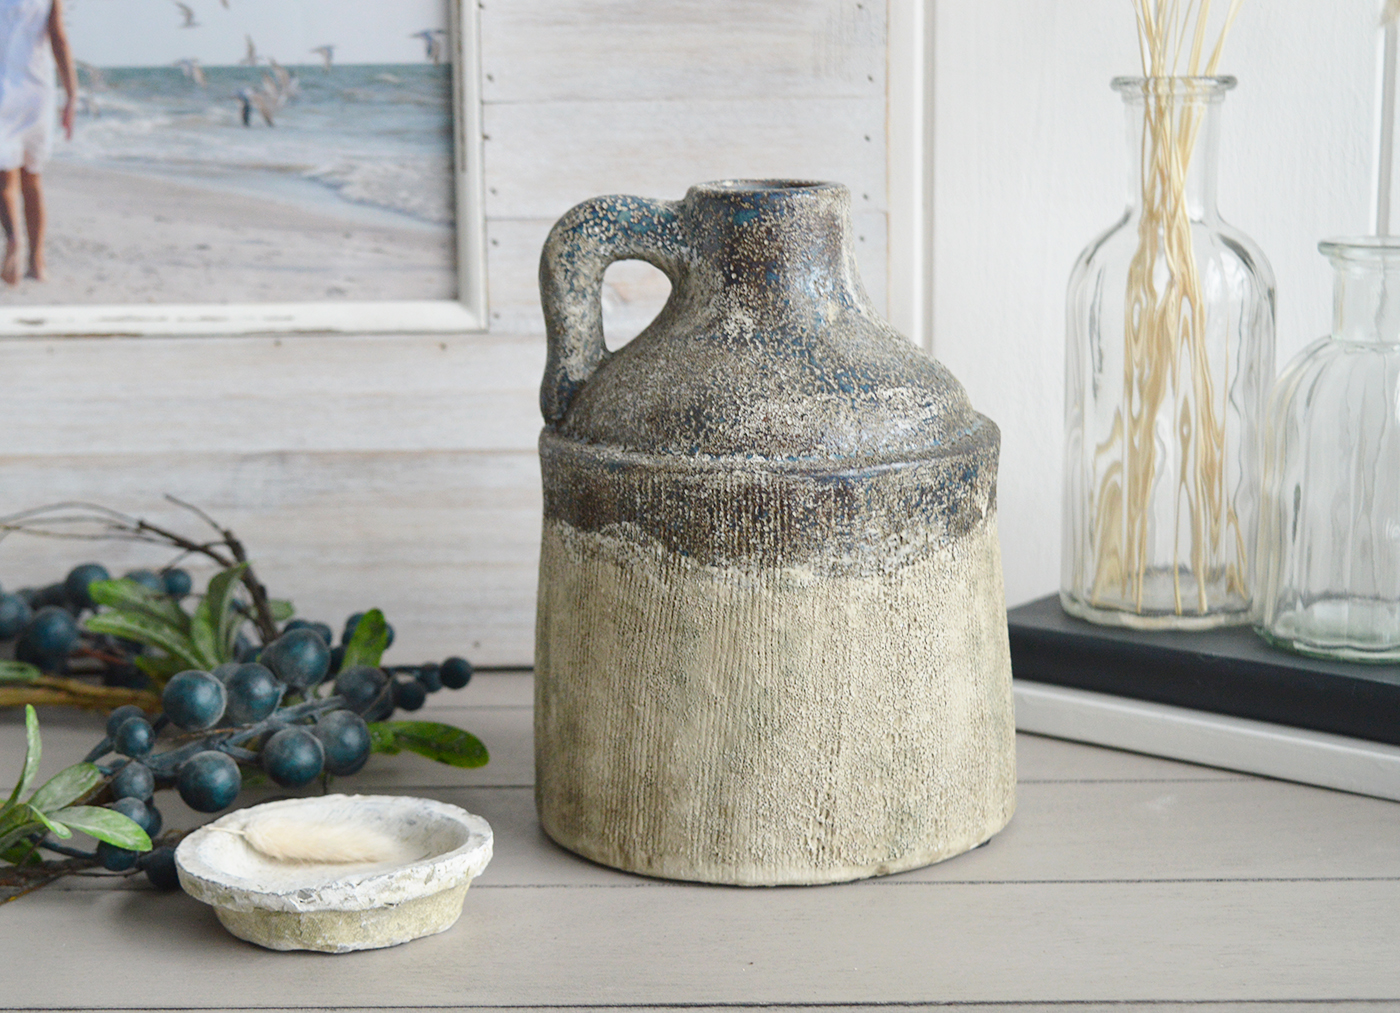 Vintage Style Ceramic Pitcher  / Vase from The White Lighthouse coastal, New England and country , farmhouse furniture and home decor accessories UK